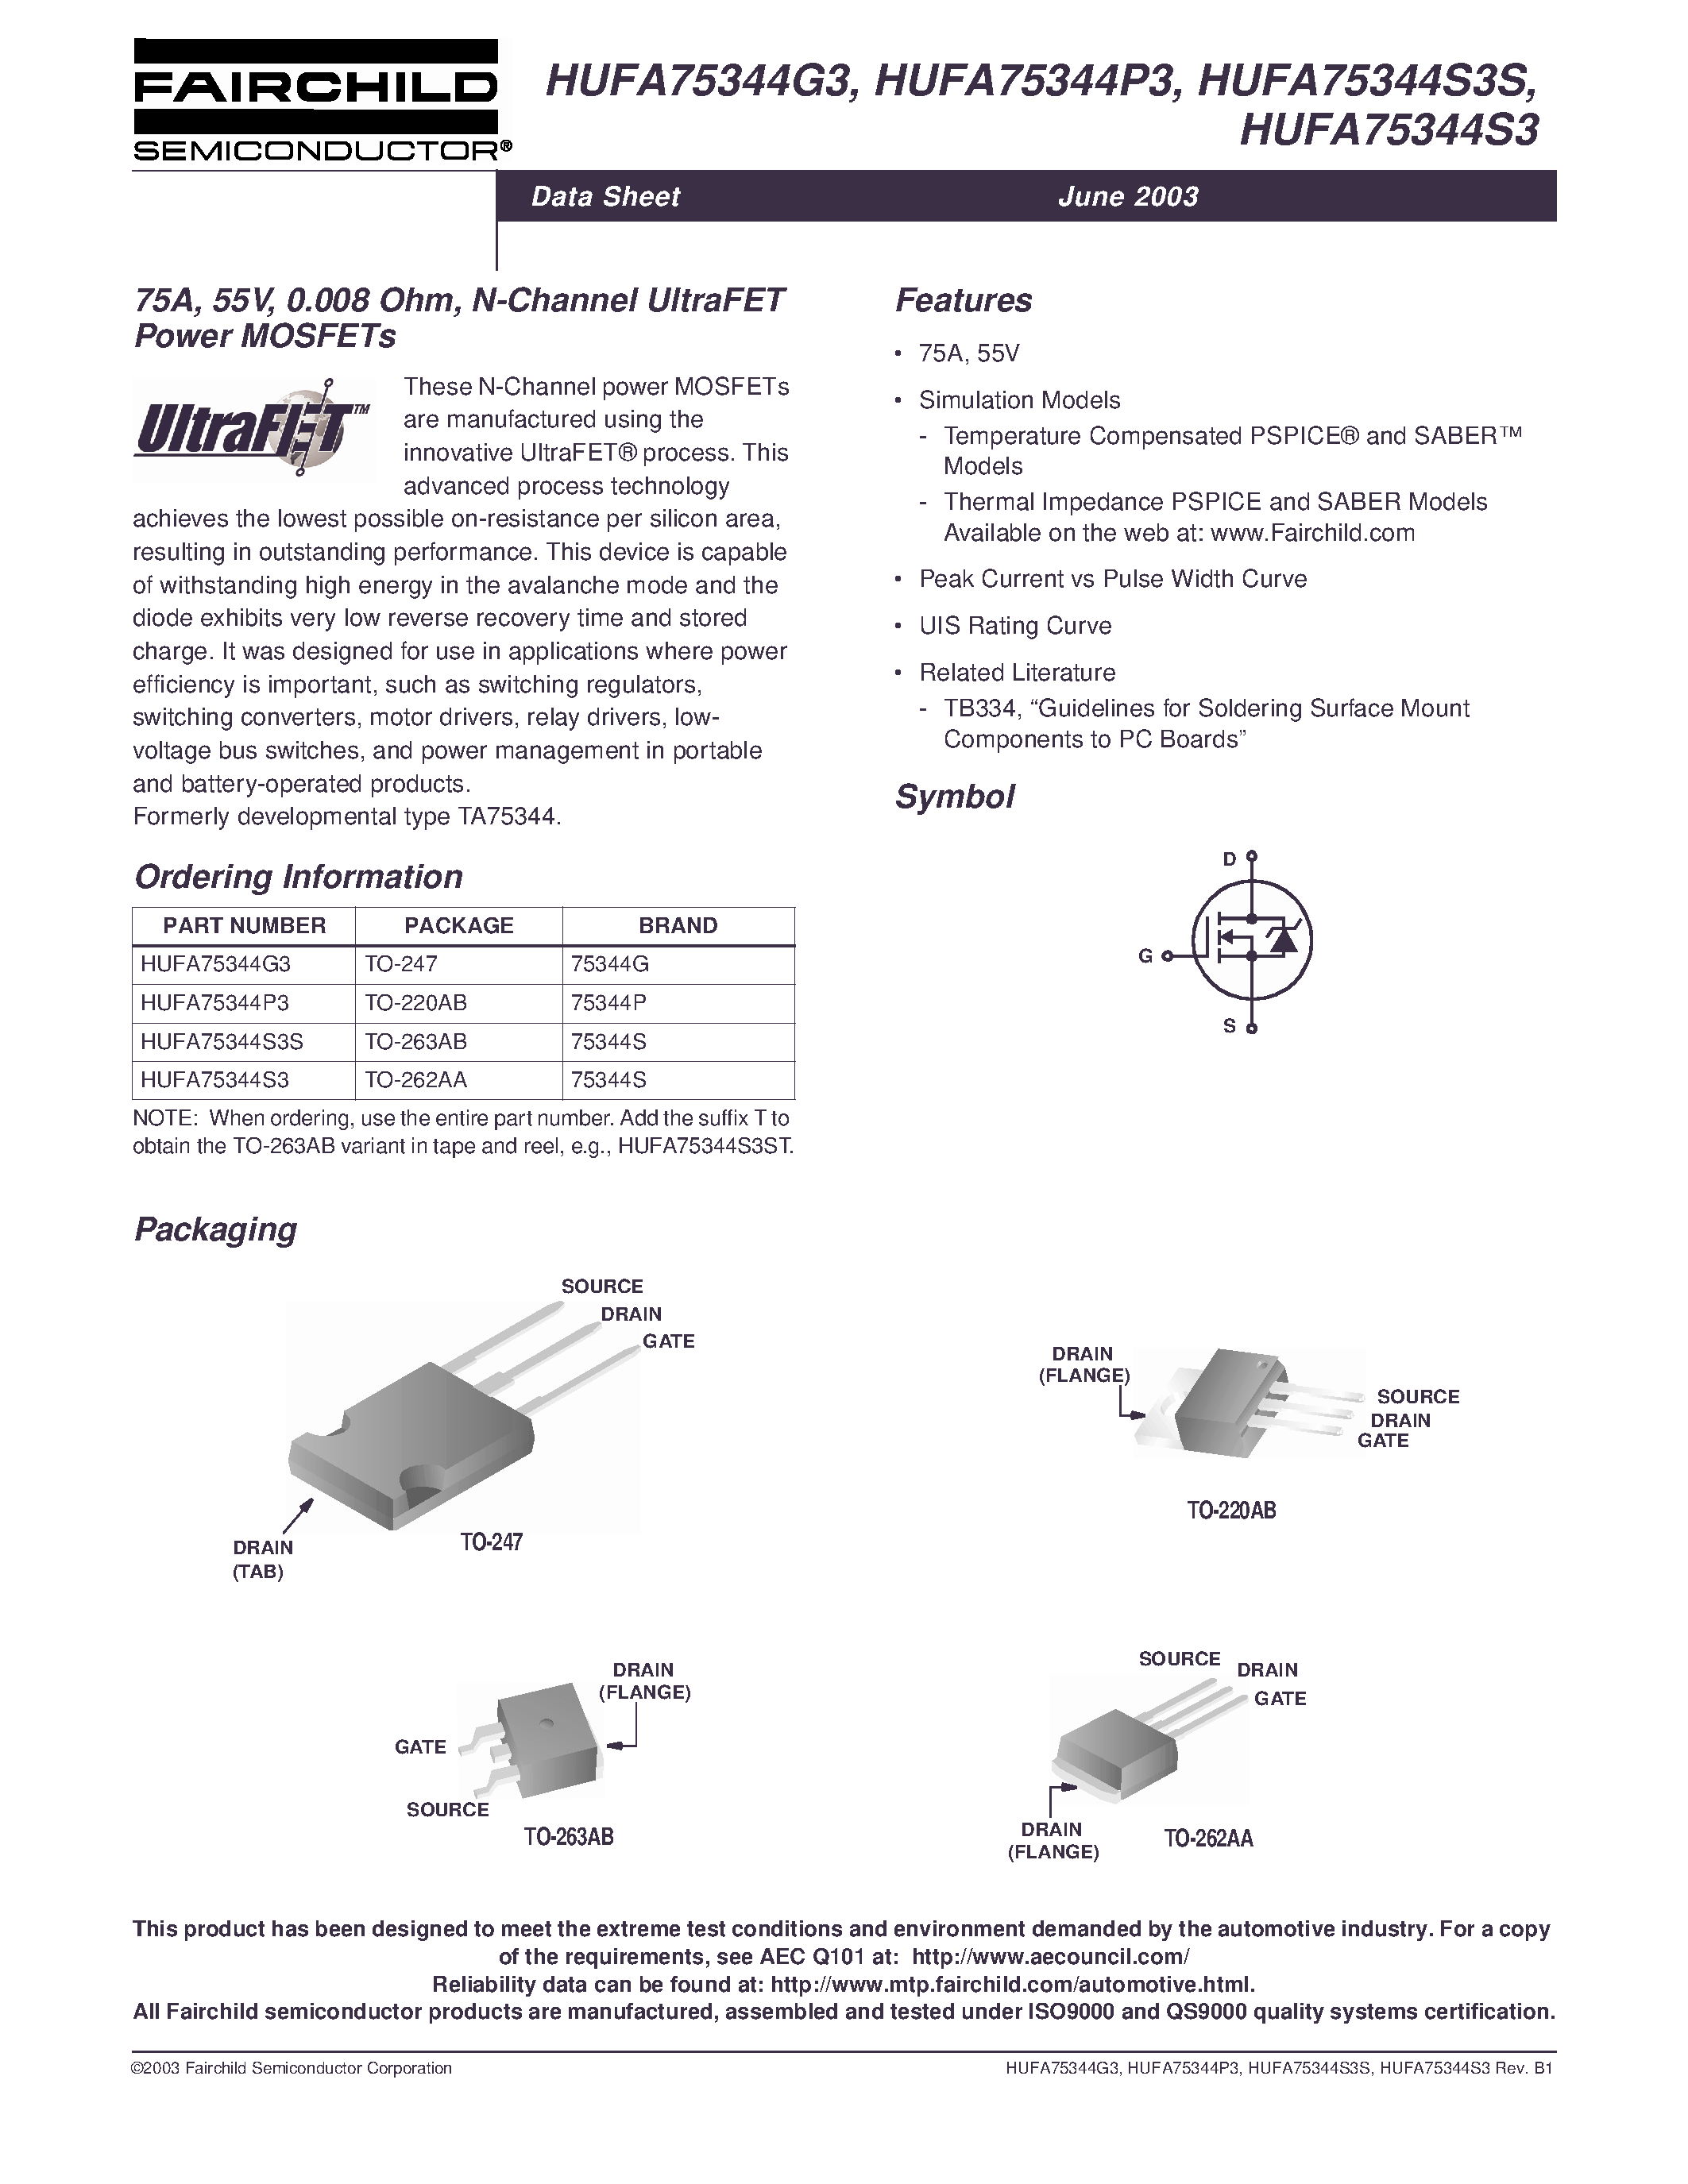 Datasheet HUFA75344S3 - 75A/ 55V/ 0.008 Ohm/ N-Channel UltraFET Power MOSFETs page 1